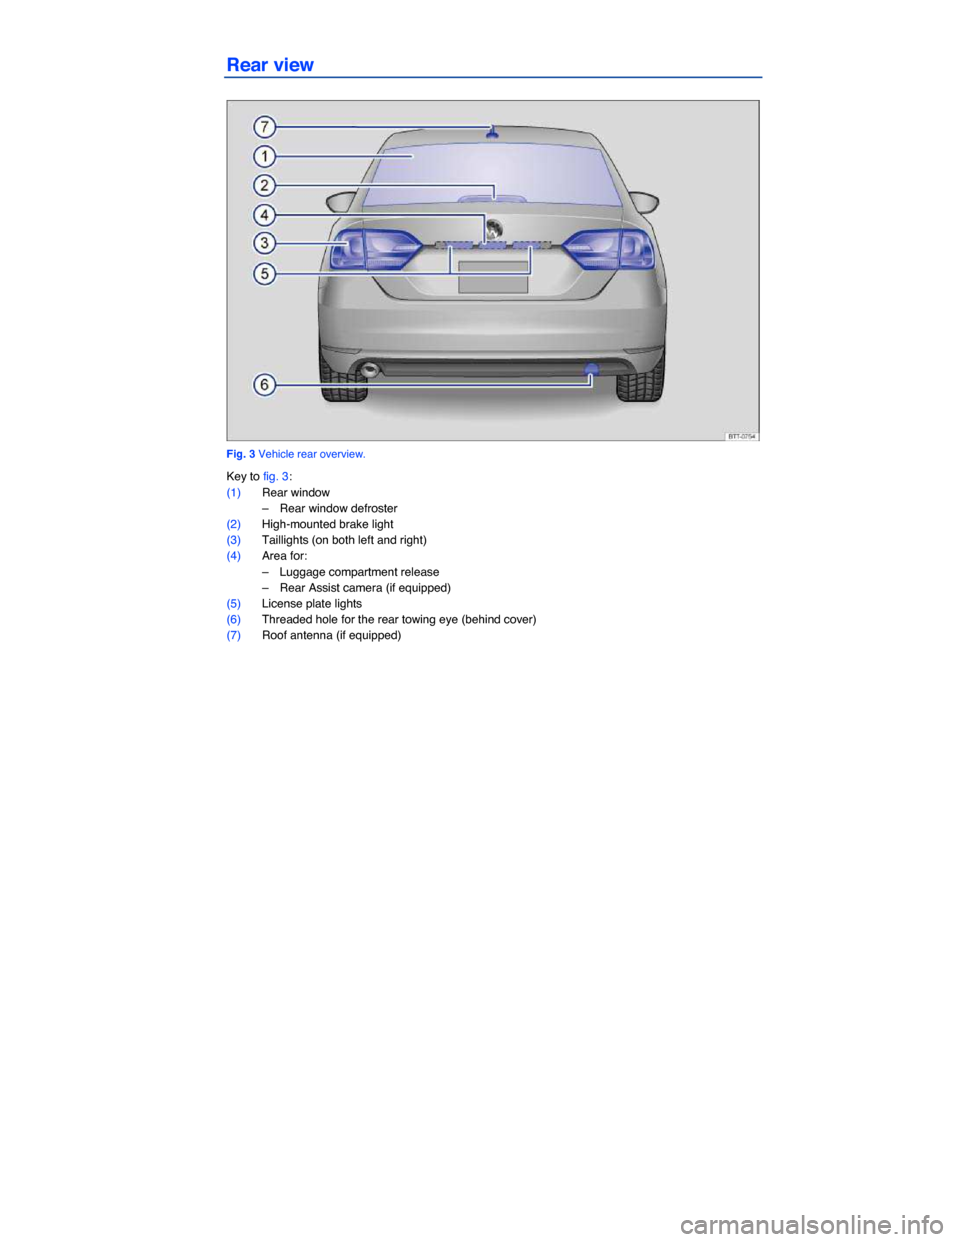 VOLKSWAGEN JETTA 2014 1B / 6.G Owners Manual  
Rear view 
 
Fig. 3 Vehicle rear overview. 
Key to fig. 3: 
(1) Rear window 
–  Rear window defroster  
(2) High-mounted brake light  
(3) Taillights (on both left and right)  
(4) Area for: 
– 